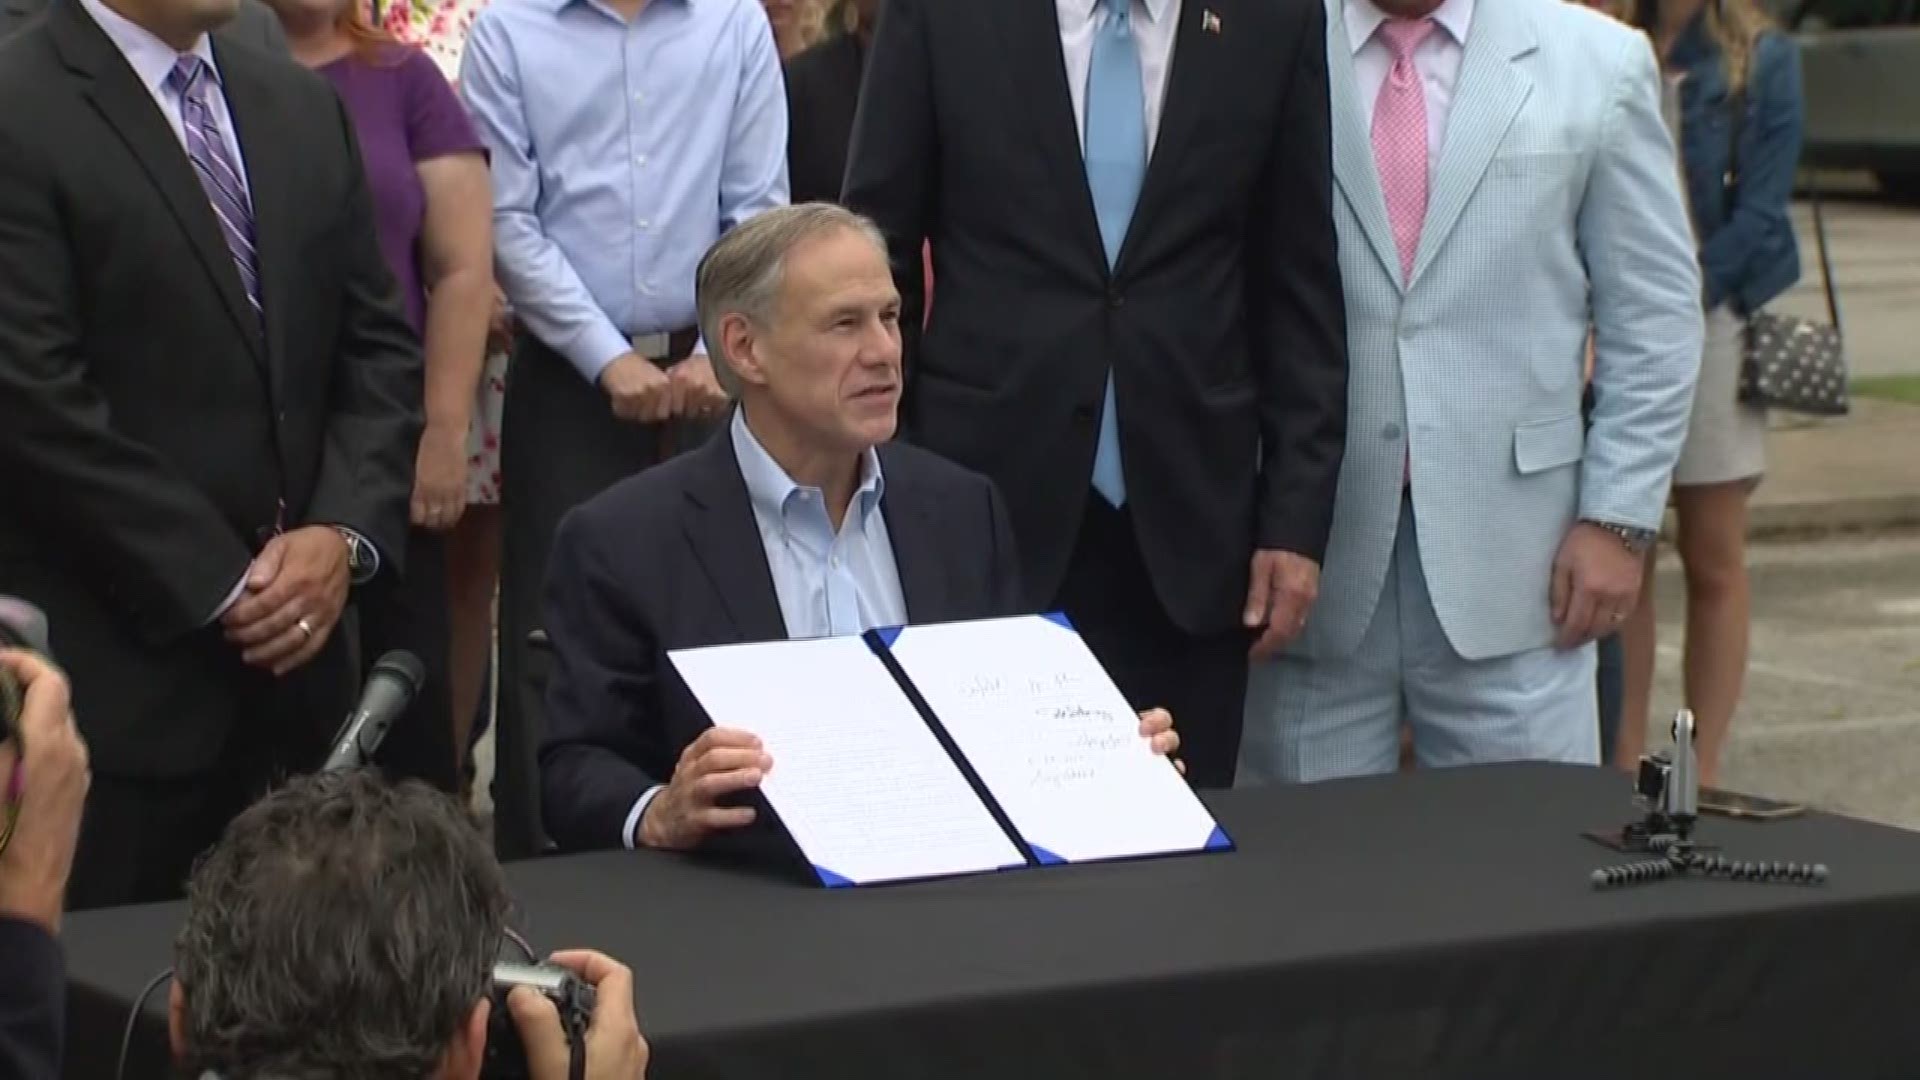 First thing this morning, Governor Greg Abbott signed House Bill 100, regulating ridesharing companies. Within 10 minutes, Lyft was back up and running in Austin -- Uber was not far behind.